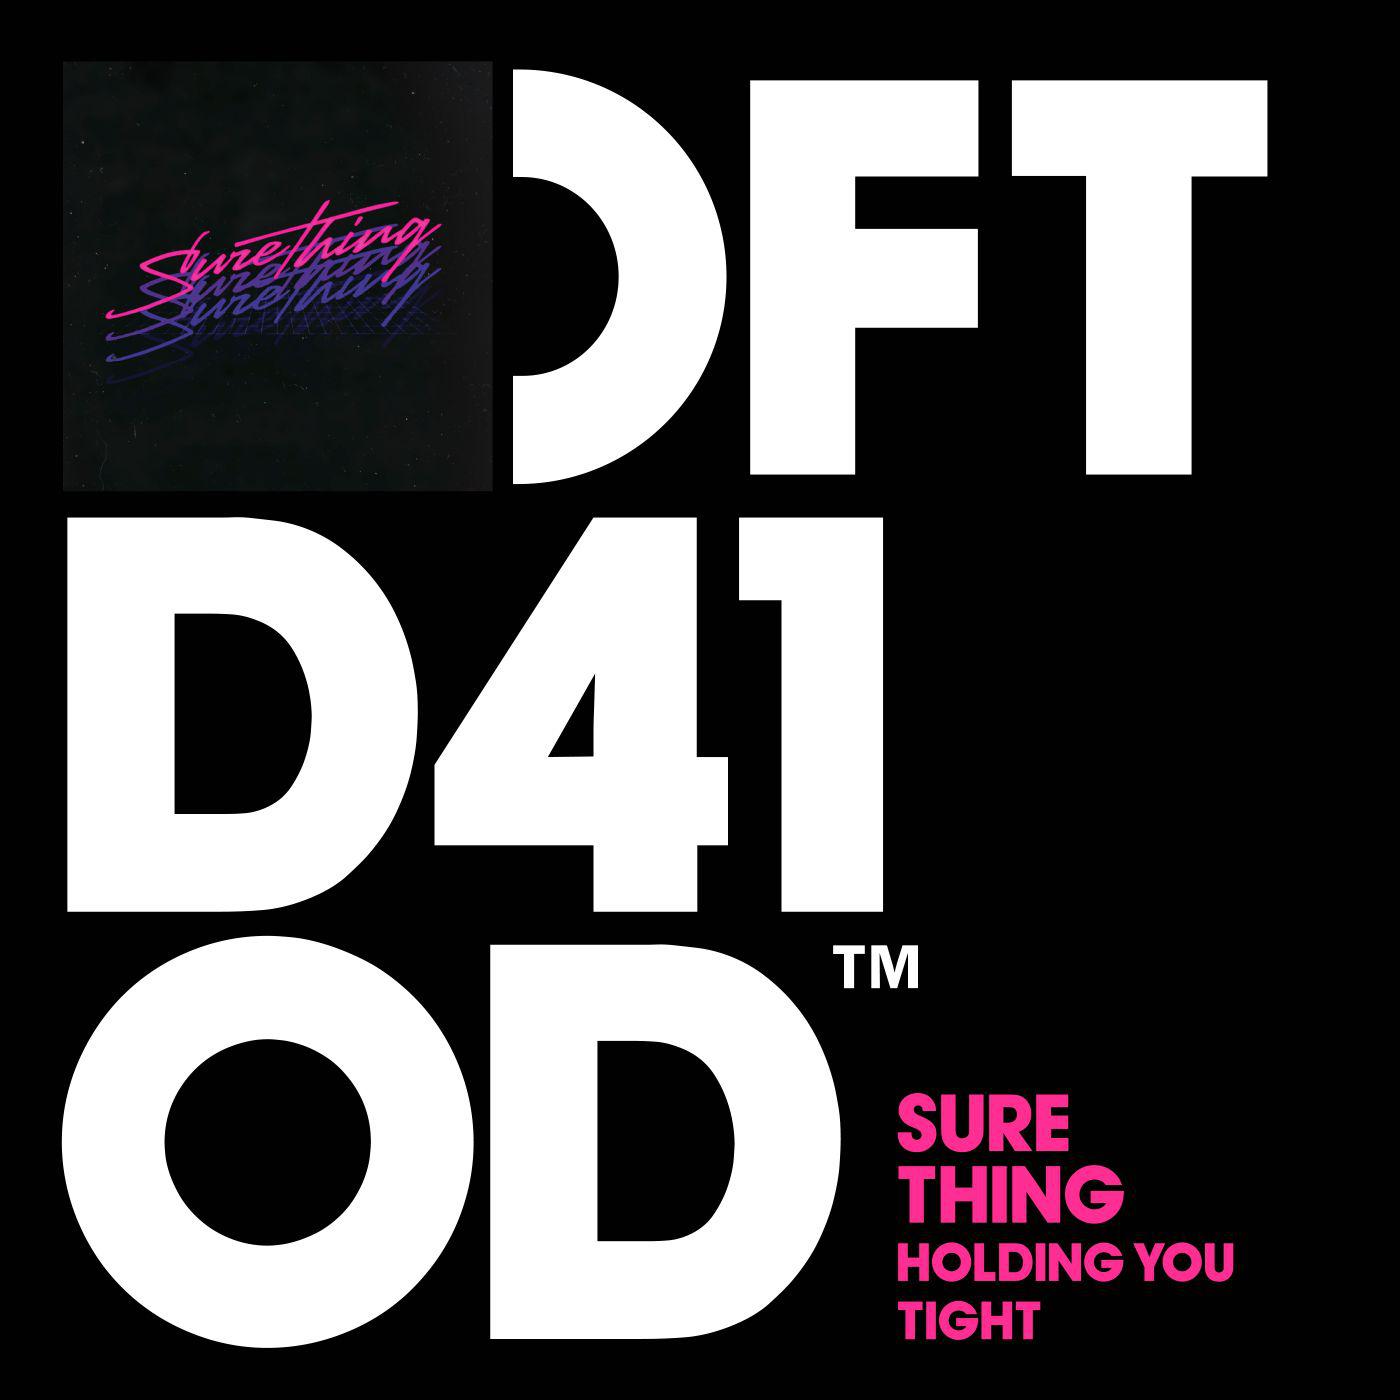 Sure Thing - Holding You Tight (Rob Mello' No Ears Dub Version)